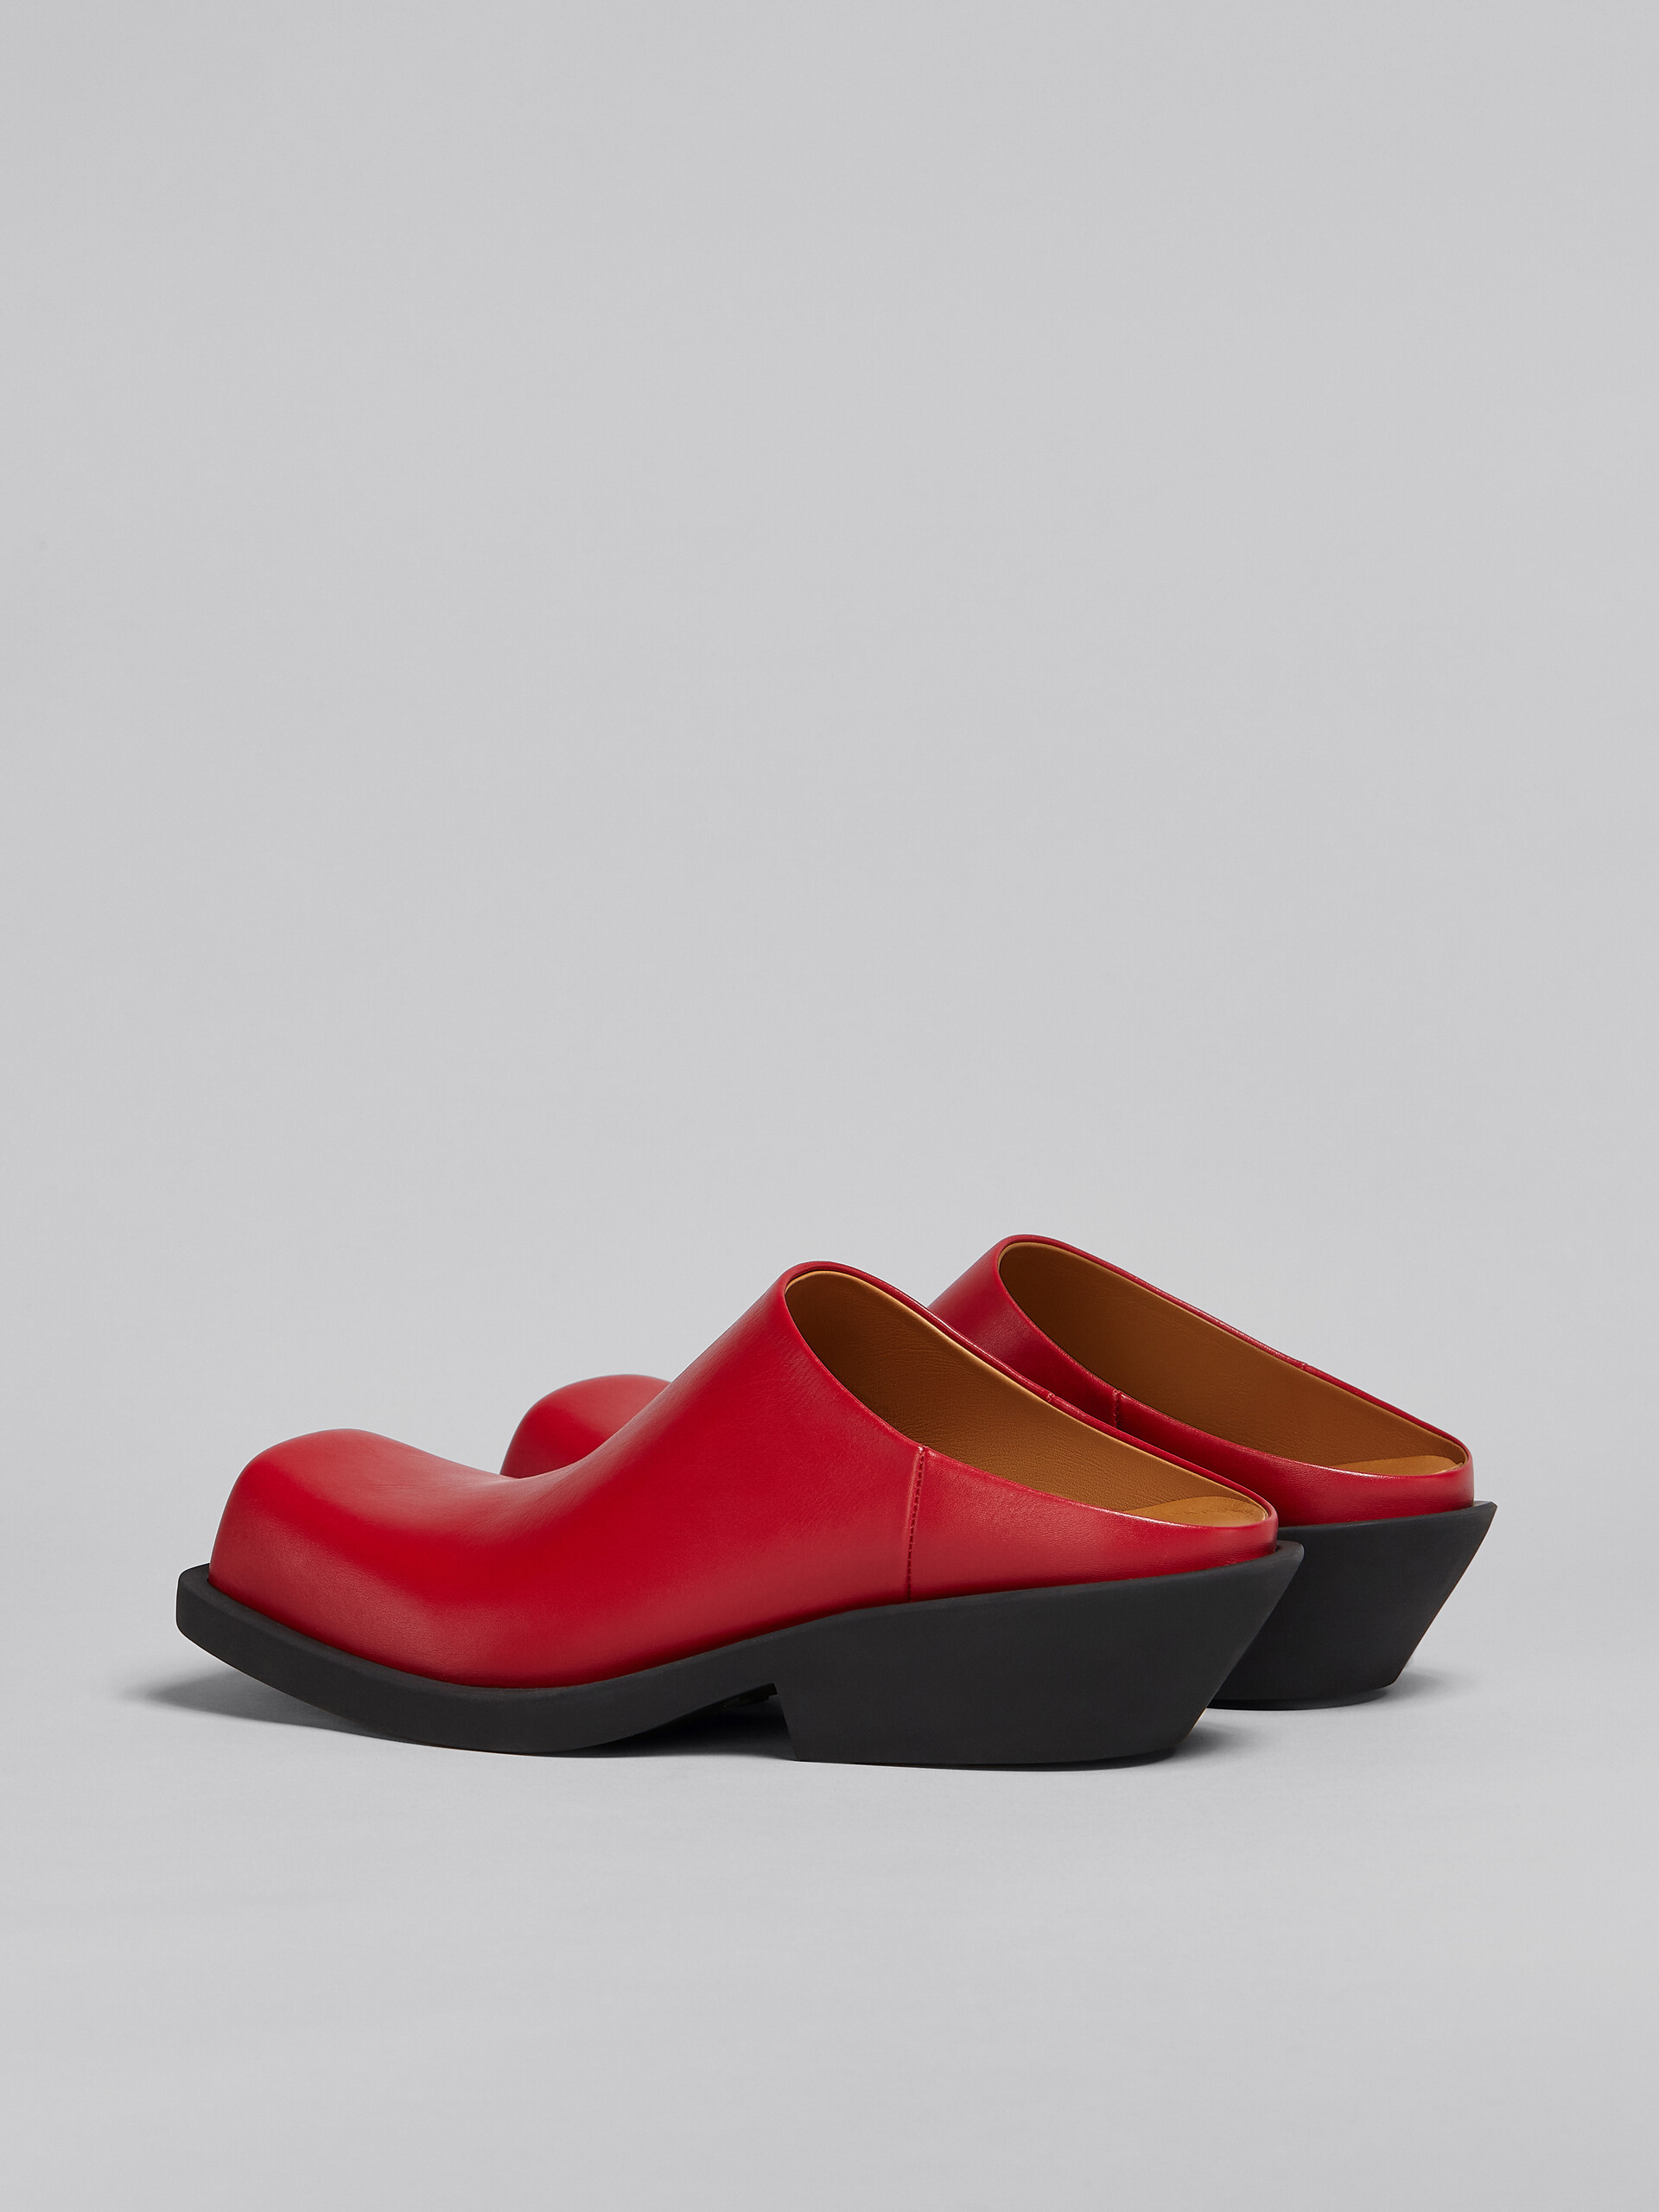 Red leather sabot - Clogs - Image 3